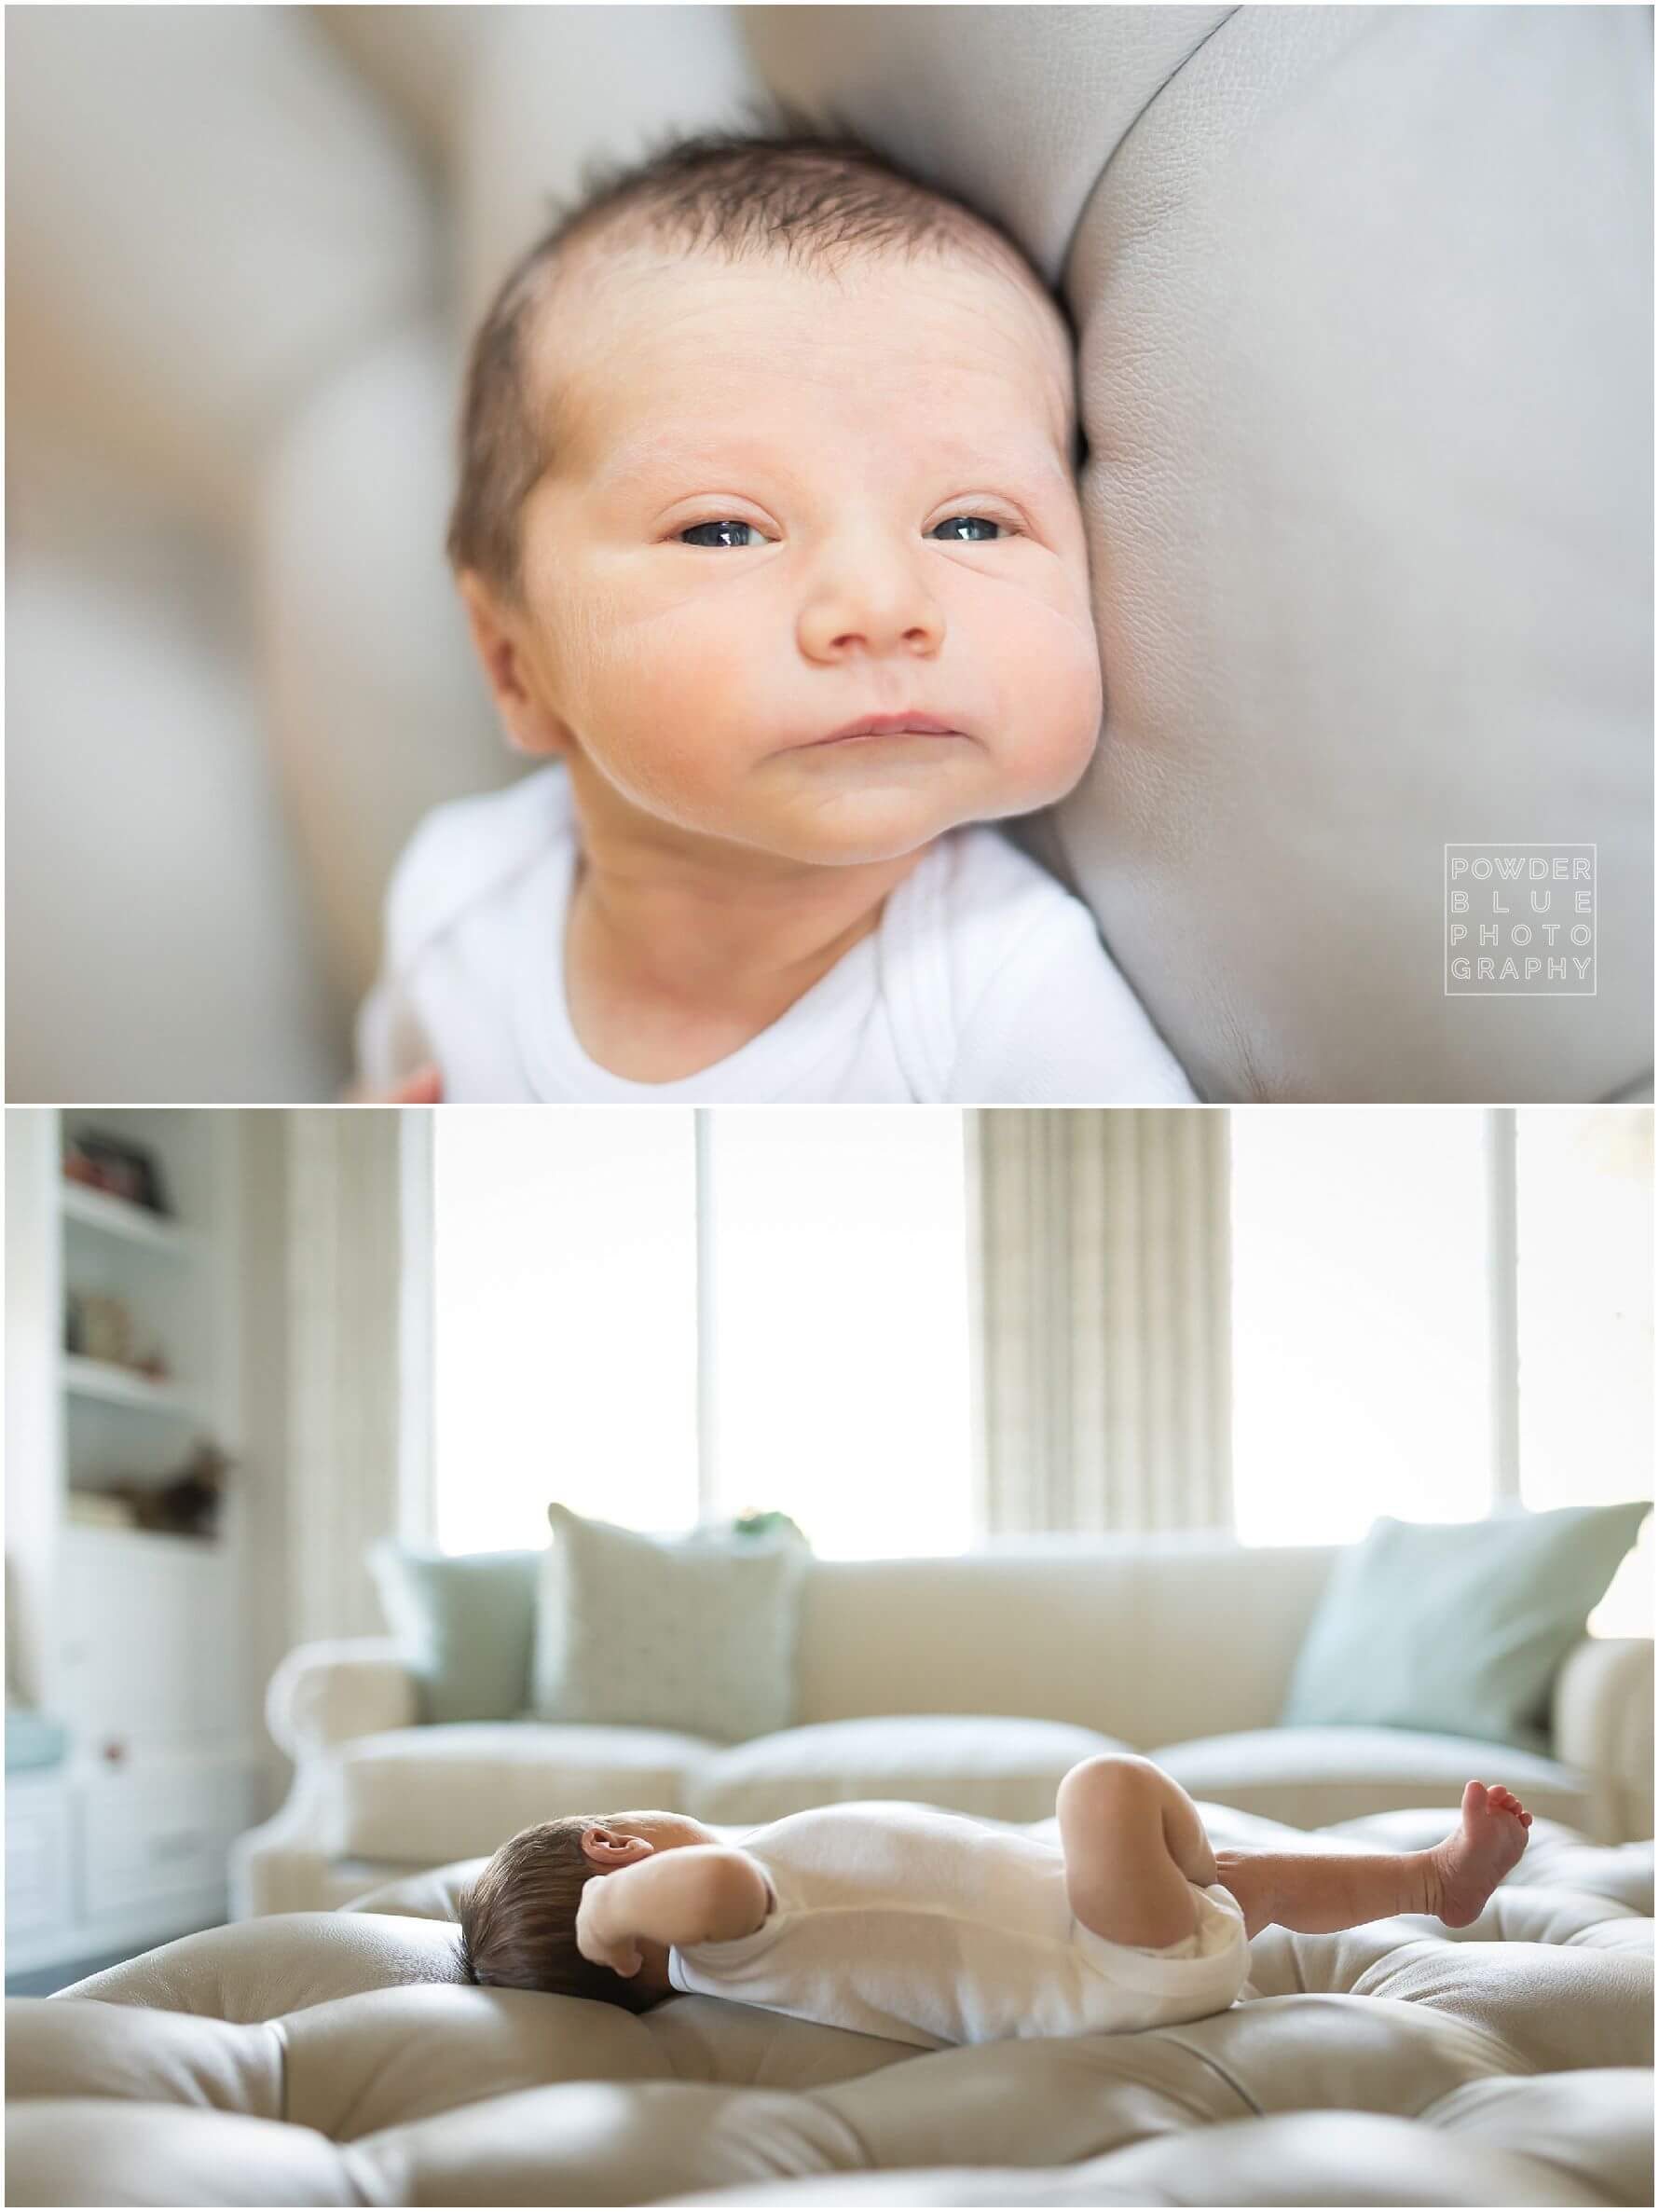 pittsburgh's photography expert missy timko photographer this newborn baby boy in a lifestyle natural pose.